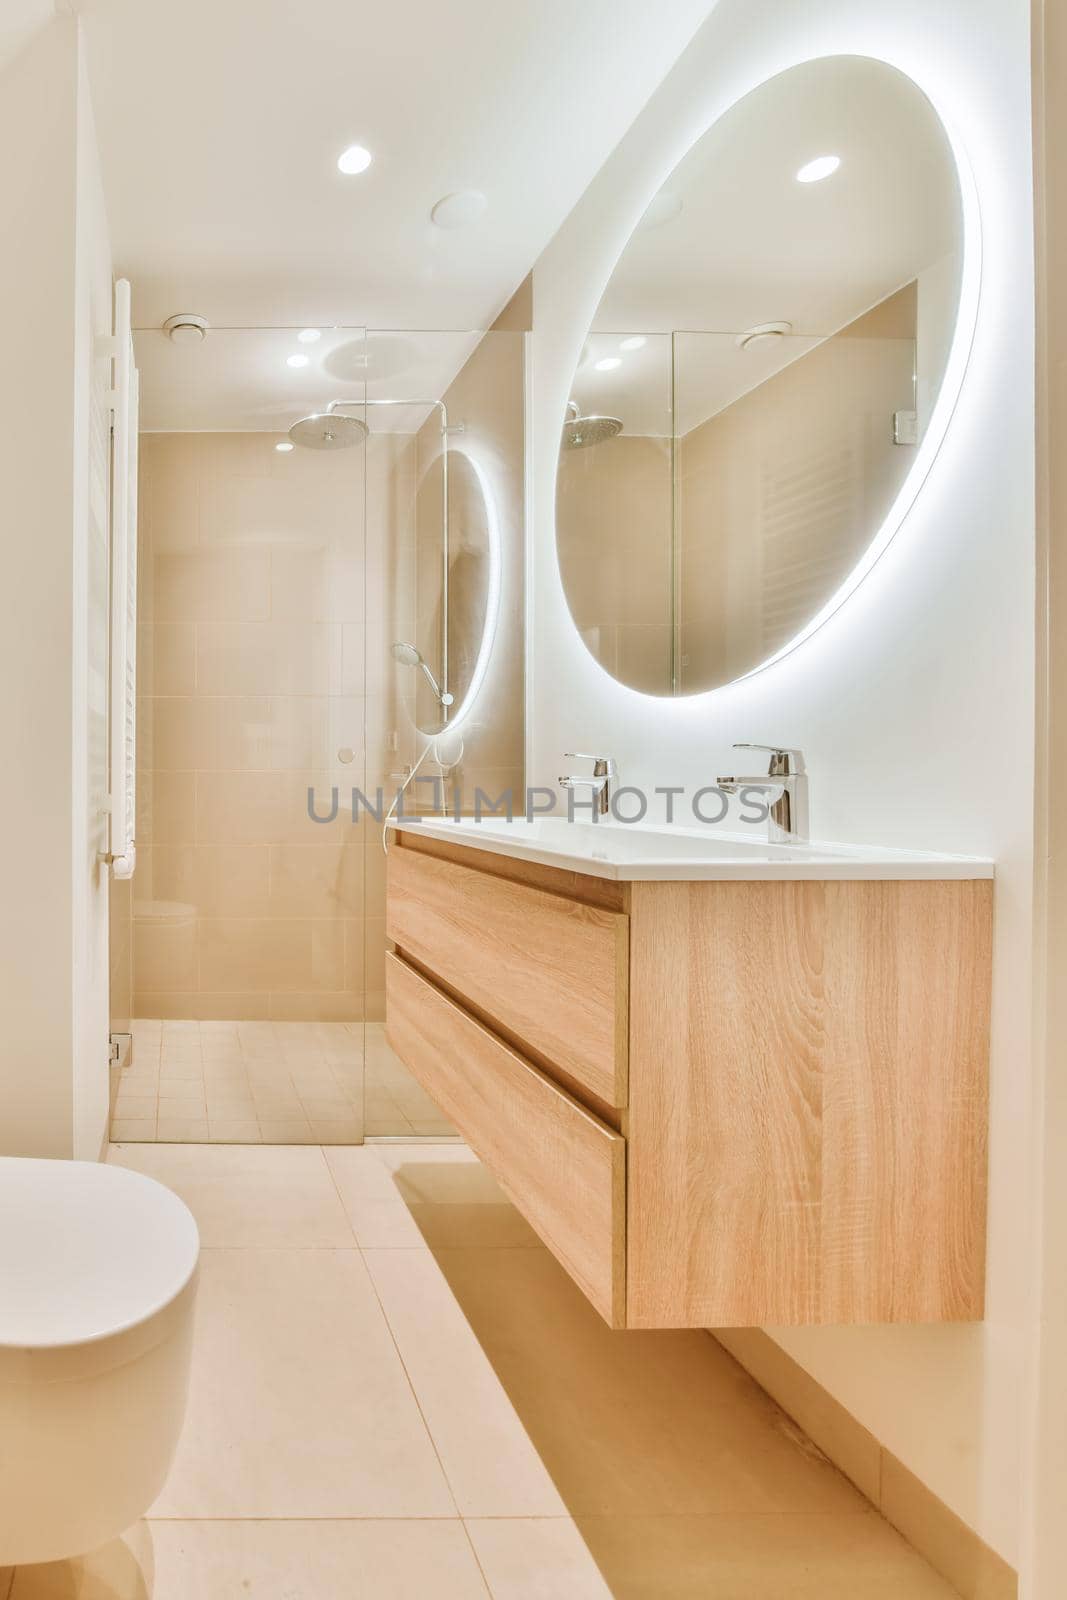 Luxurious bathroom with beige tiled floor and round large mirror with lighting